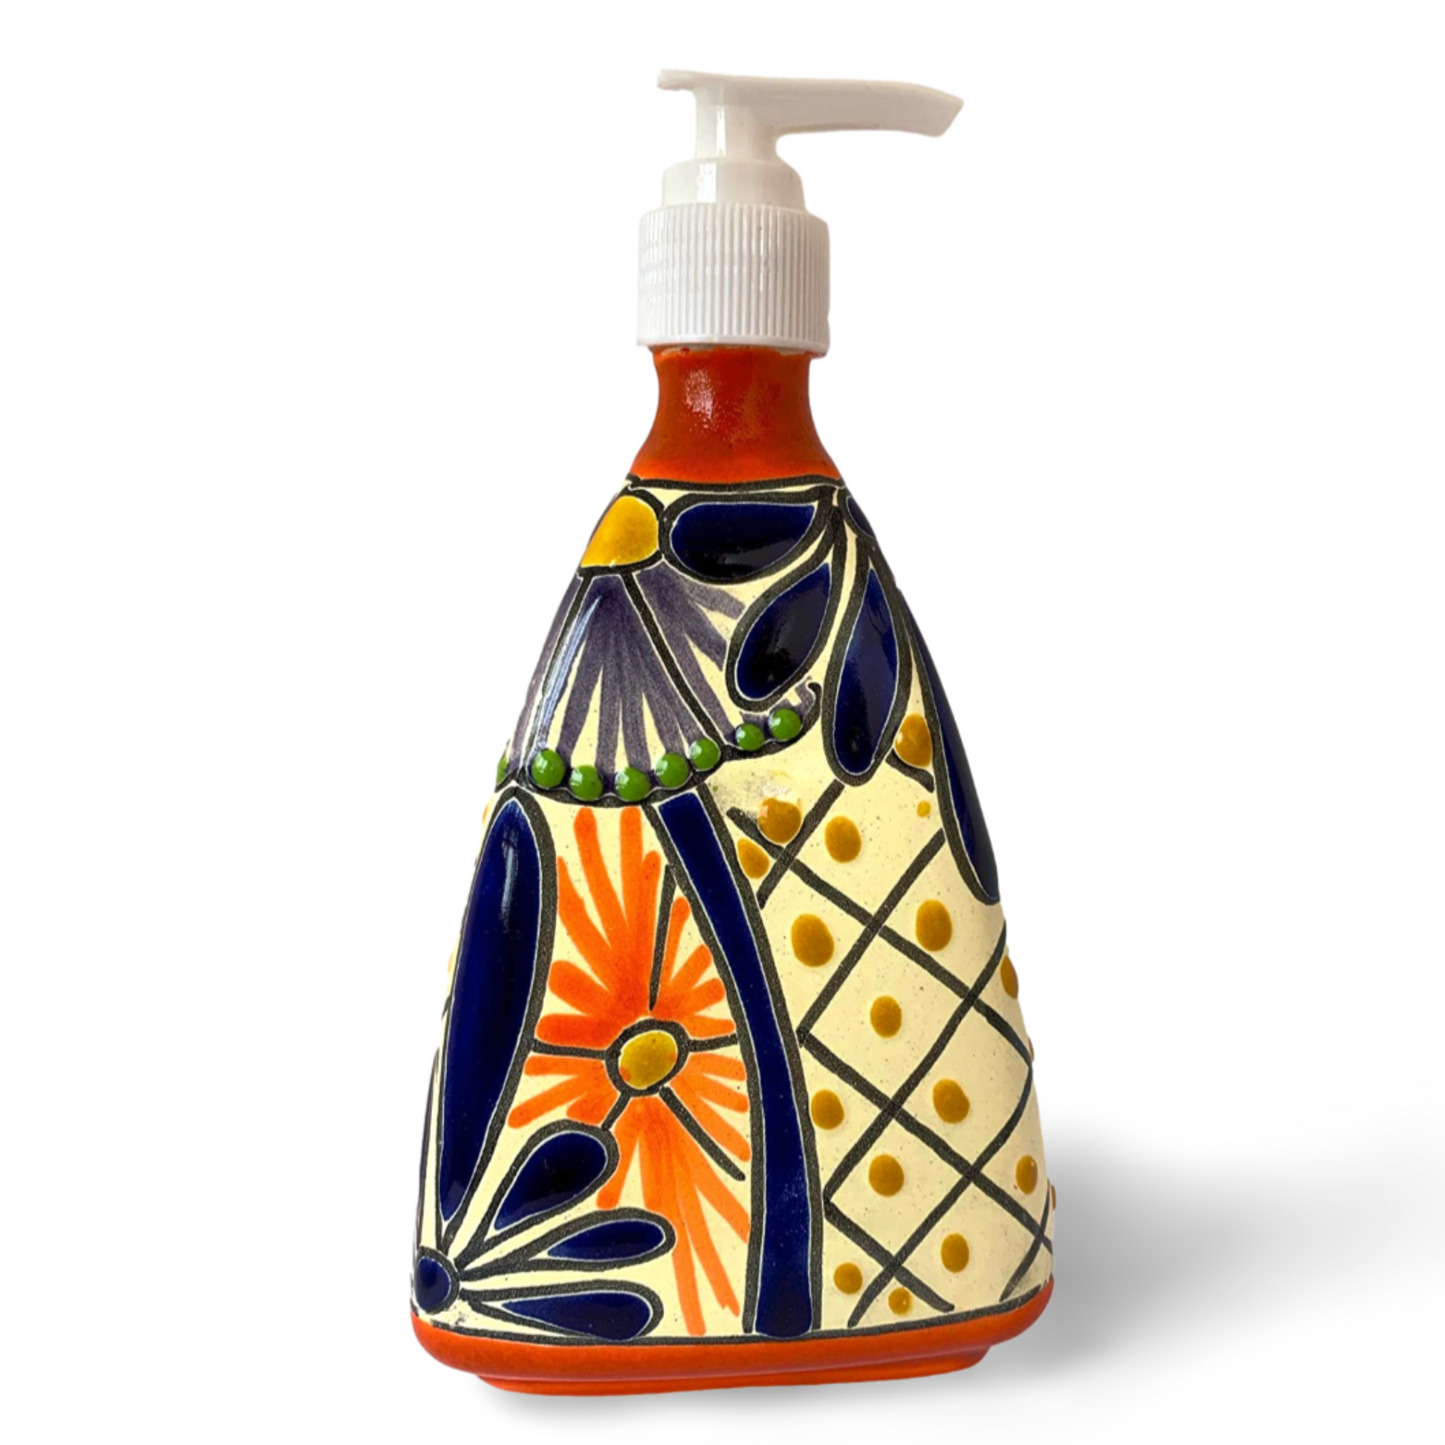 front Pyramid-shaped Ceramic Soap Dispenser, hand-painted by Mexican artisans, perfect for adding a vibrant touch to kitchen or bathroom decor.